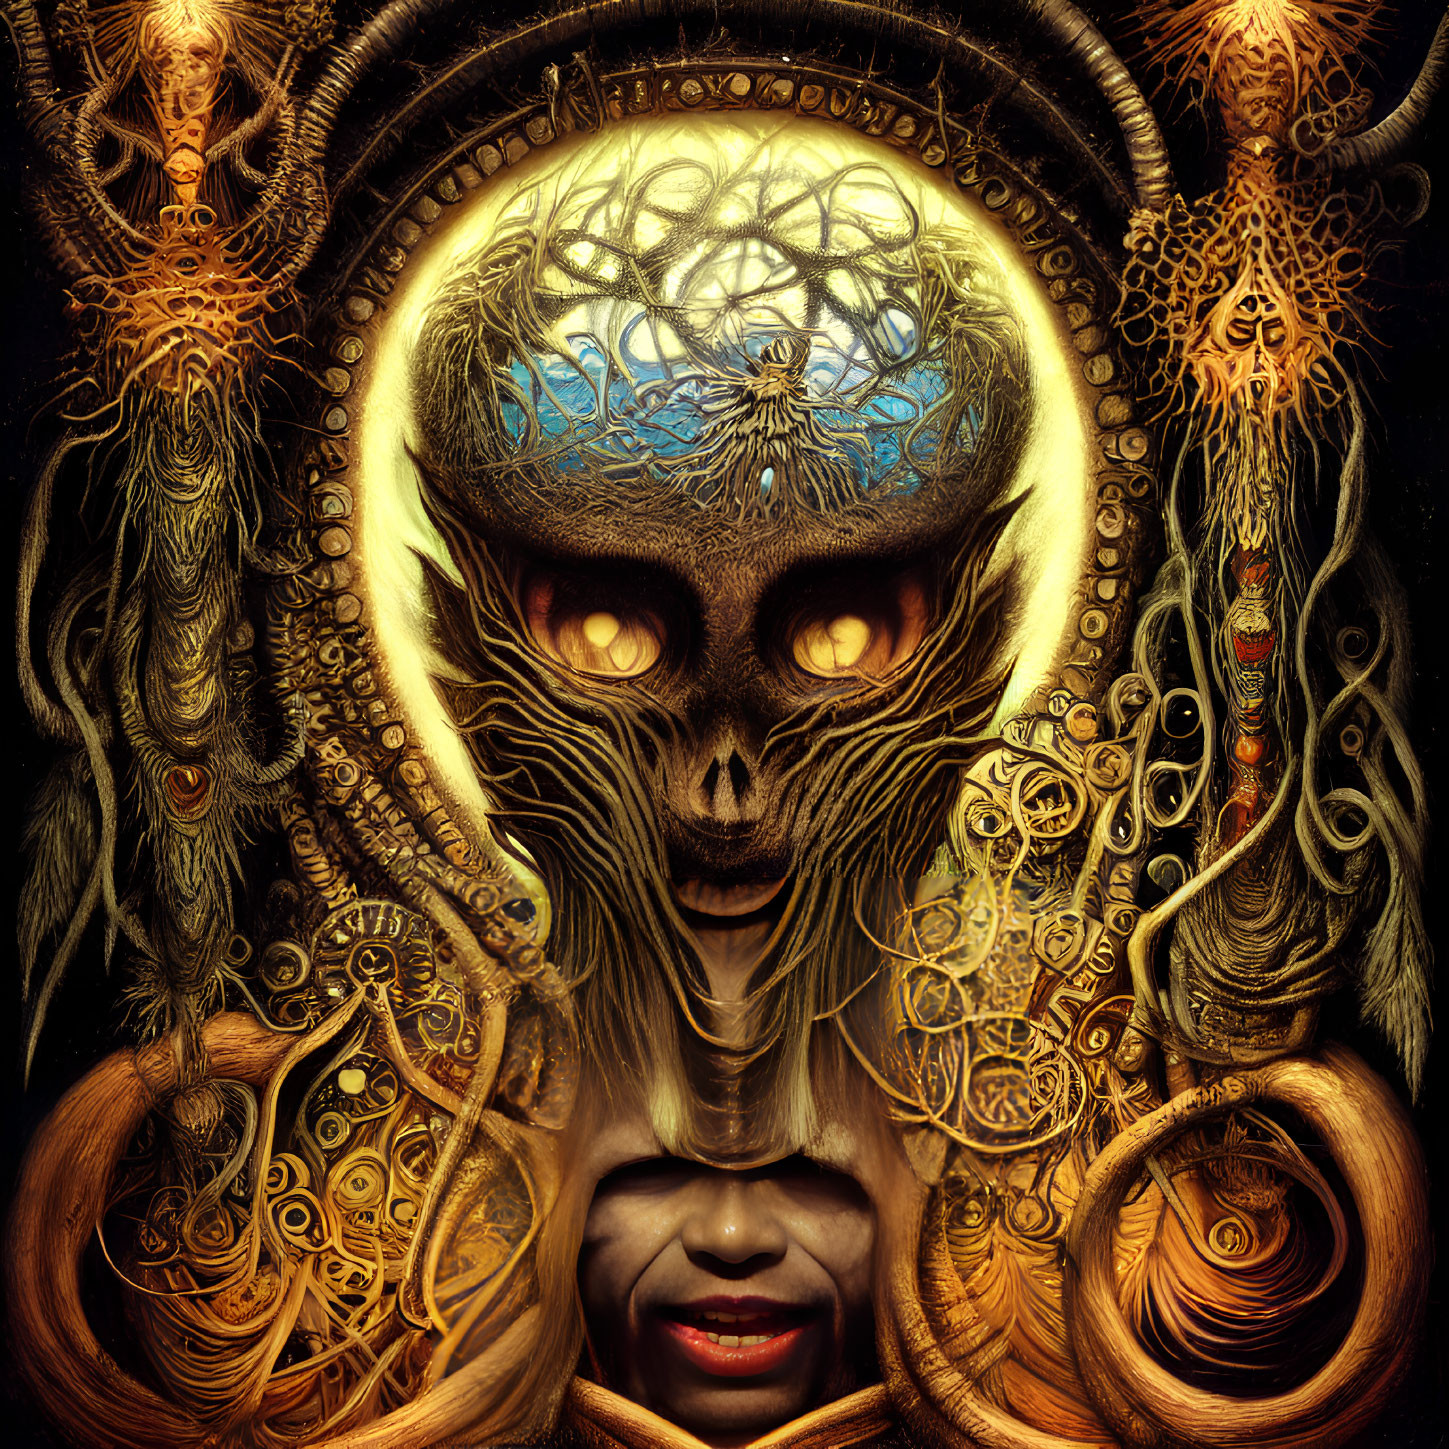 Intricate fantasy art: Otherworldly face with dark eyes, golden patterns, and glowing tree